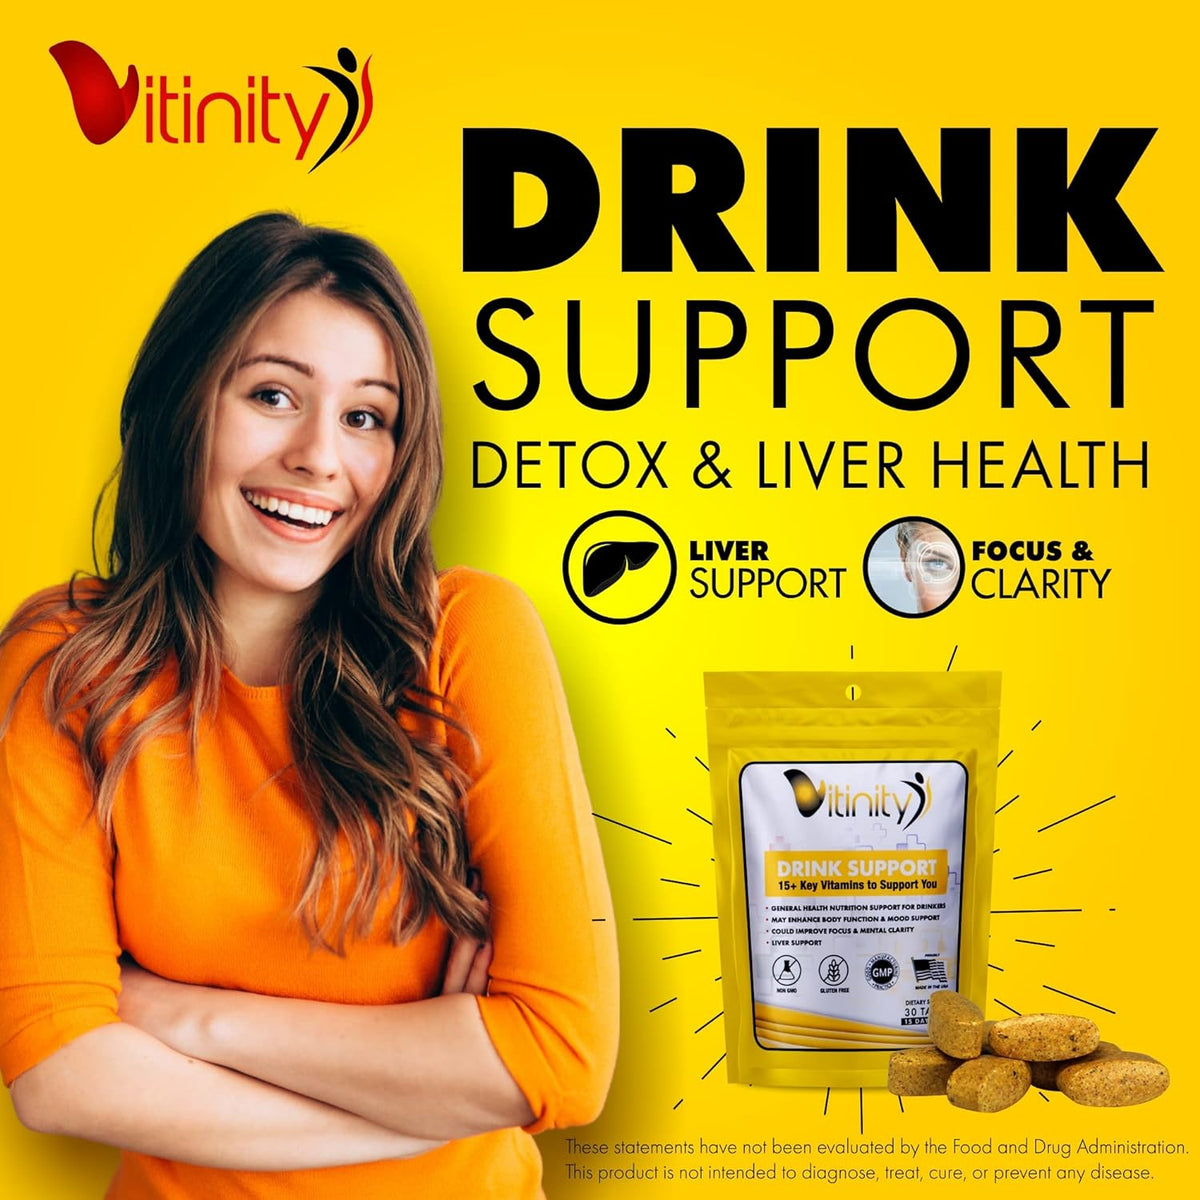 Anti Alcohol Drink Support Supplement - Craving Support,Liver Health,Reduce Alcohol Intake Formula - Kudzu,Milk Thistle Holy Basil, Natural Detoxify,Gradual Reduction,Nutrient Replenisher - 15 Days